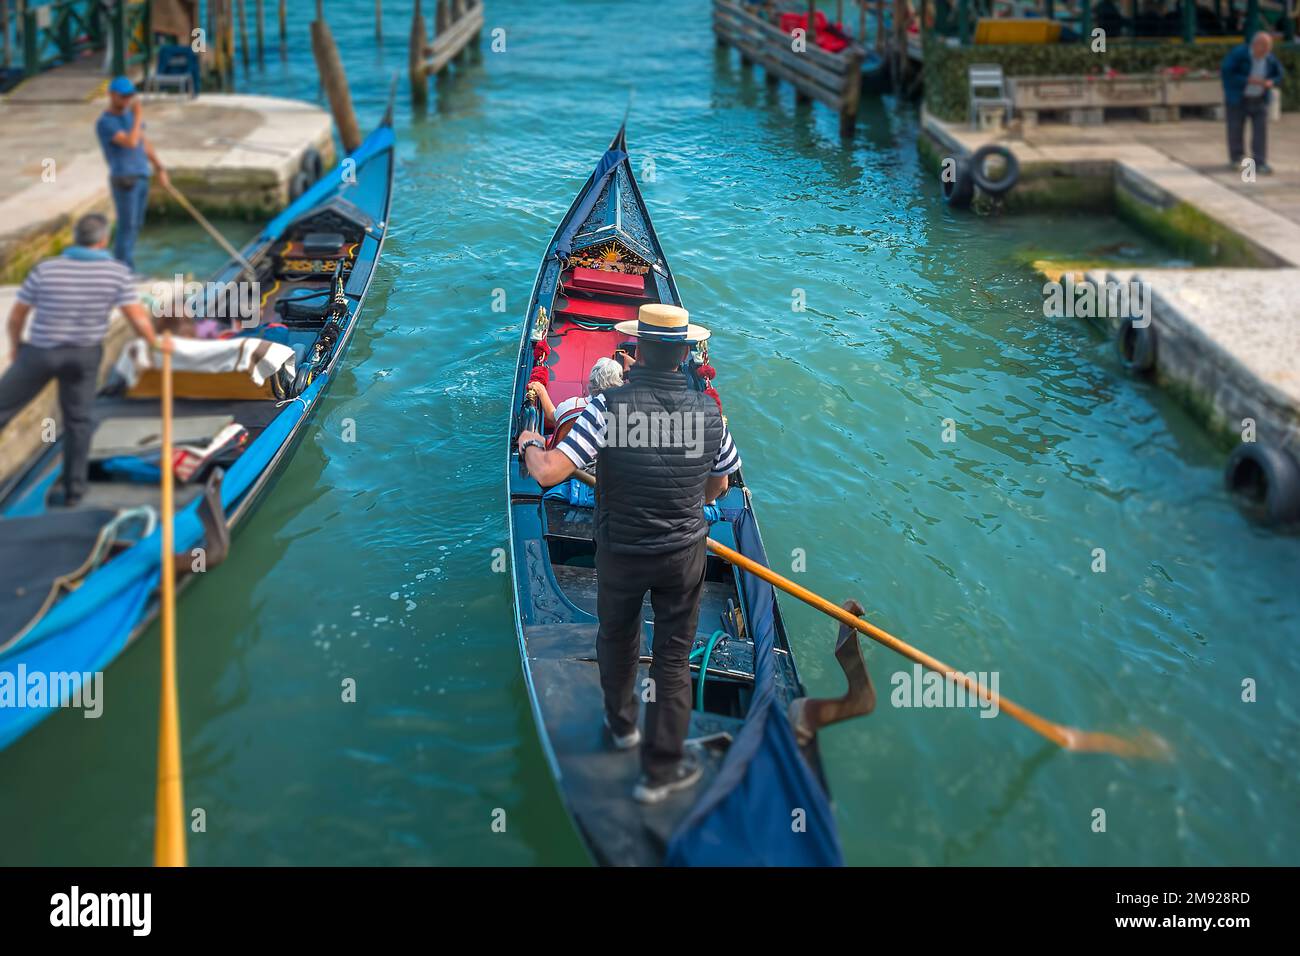 A Gondoliere is taking his guest around Venice on a small side canal passing another Gondola in Venice, Italy Stock Photo